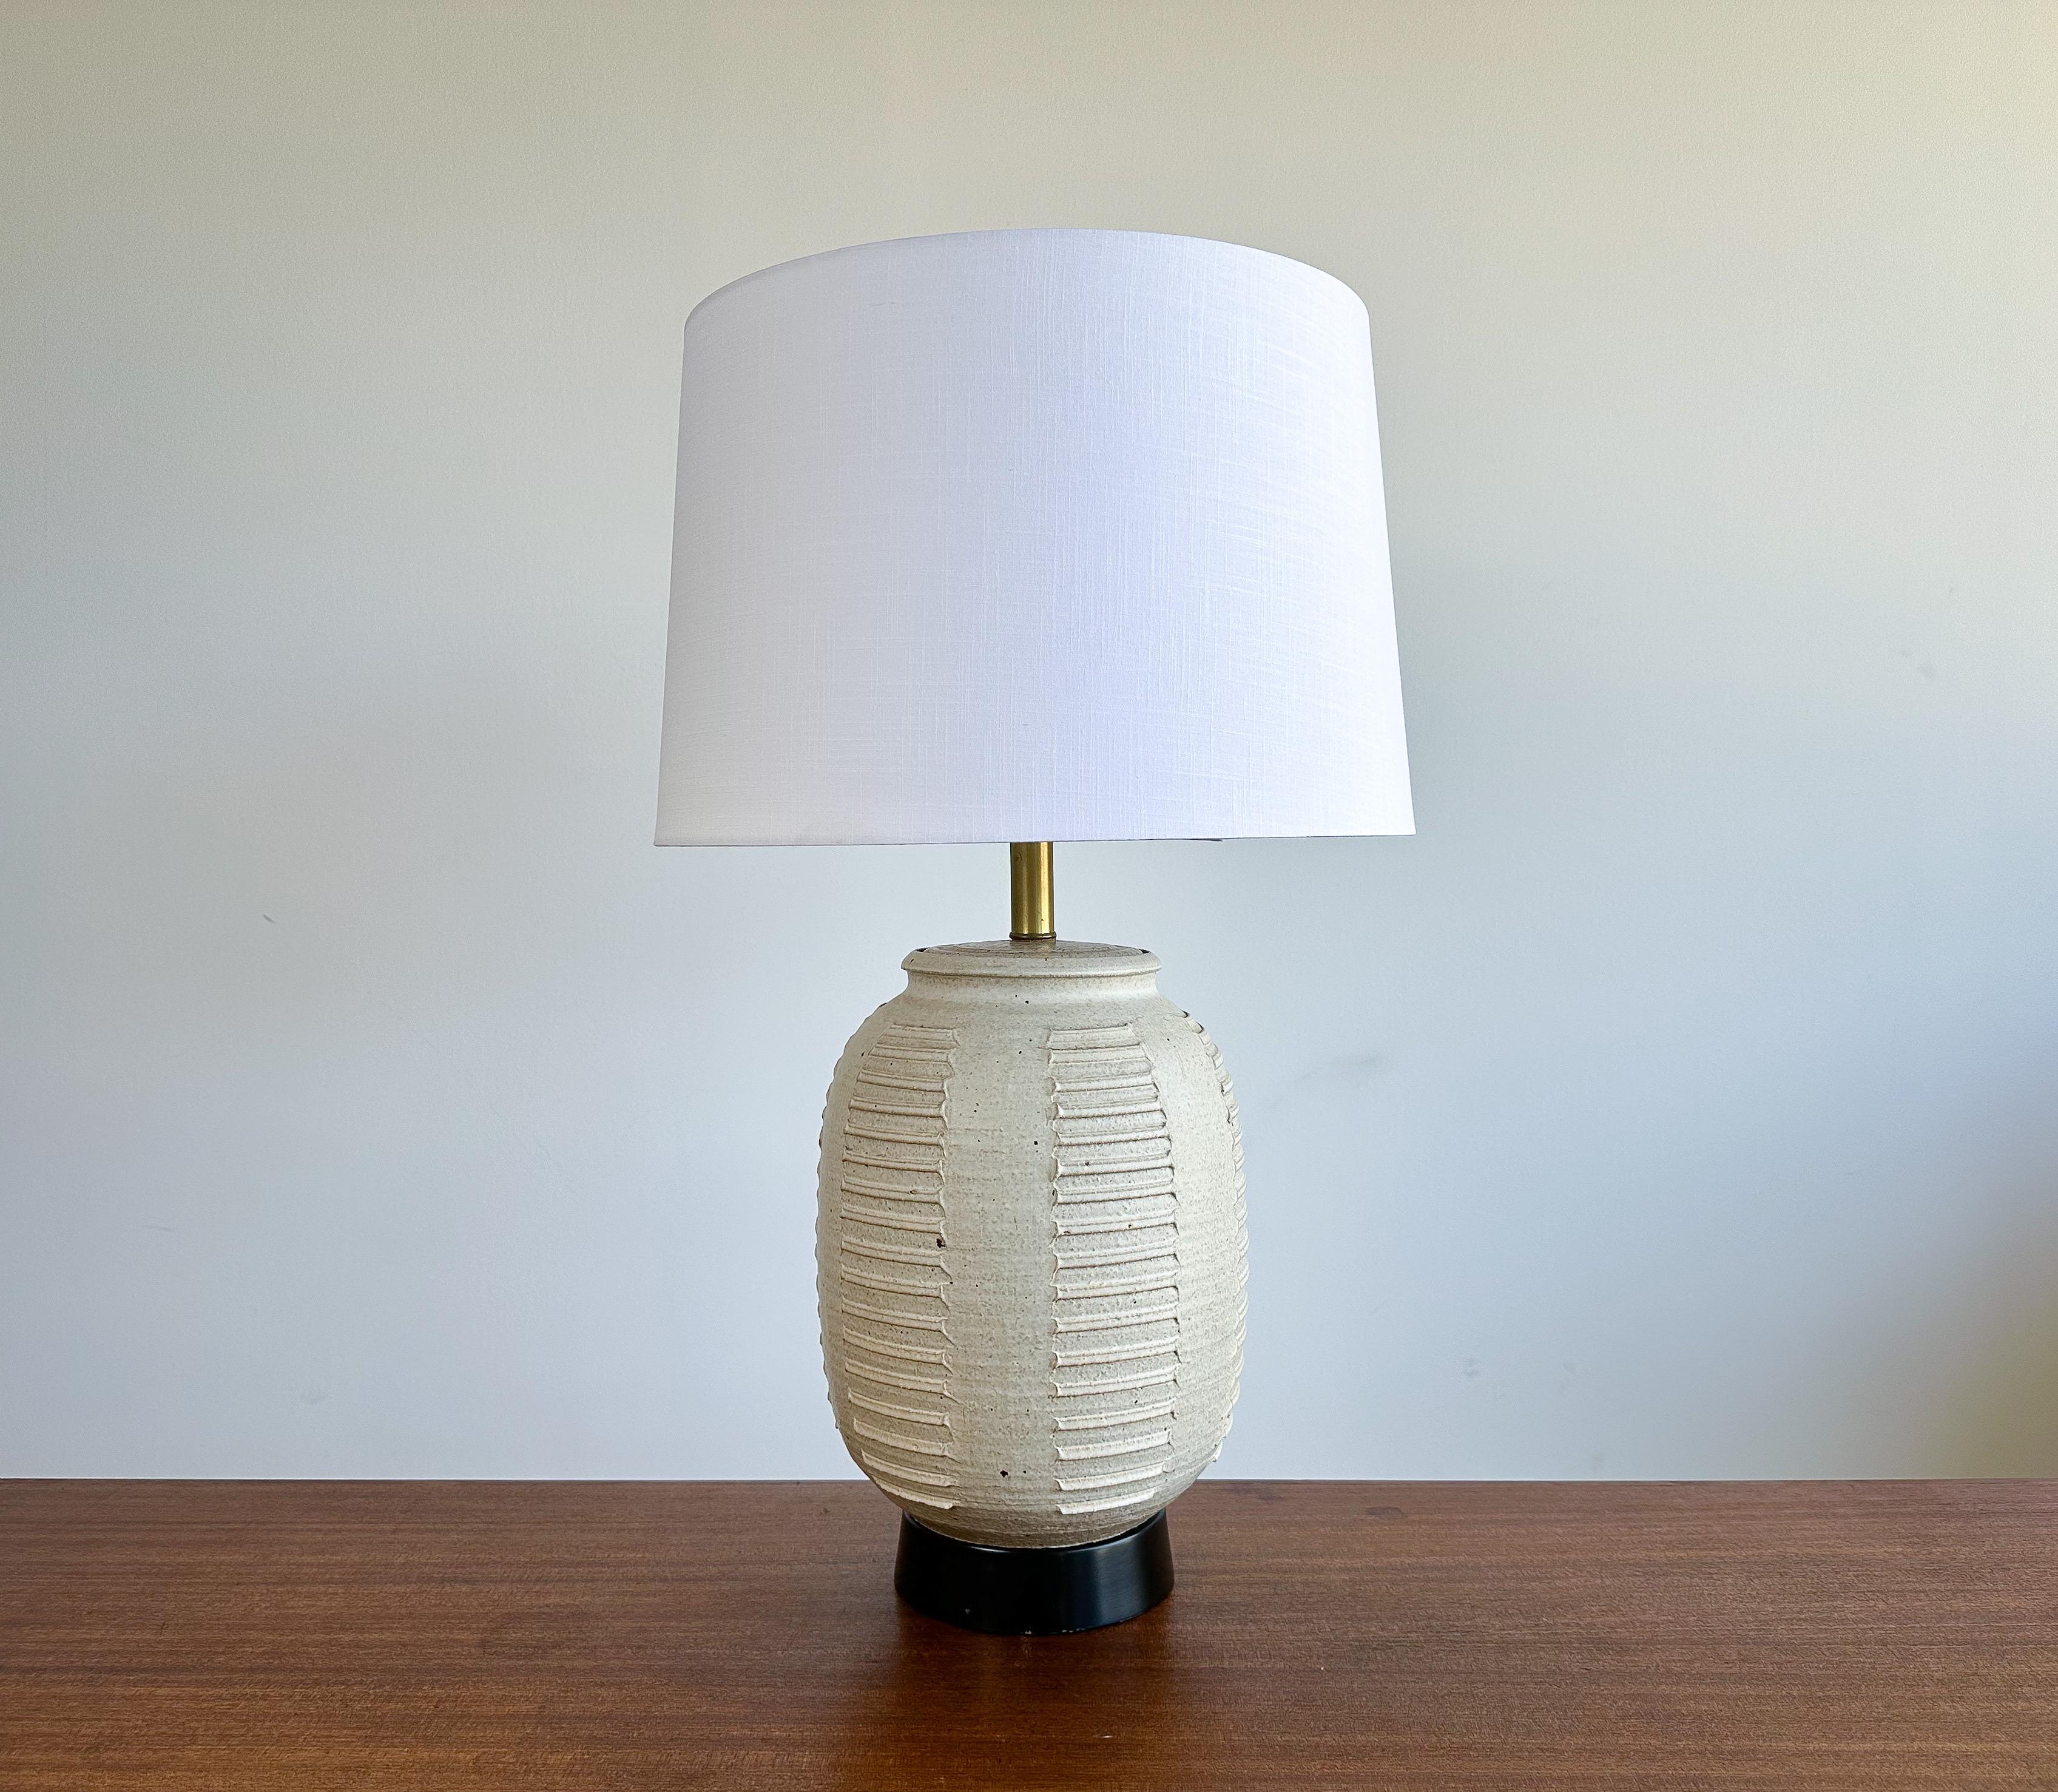 Offered is a handmade incised ceramic lamp by Bob Kinzie for Affiliated Craftsmen, circa 1960s.

Great form and incised details make this a great candidate if you're wanting a unique table lamp. Newly rewired, ready for use.

The dimensions listed